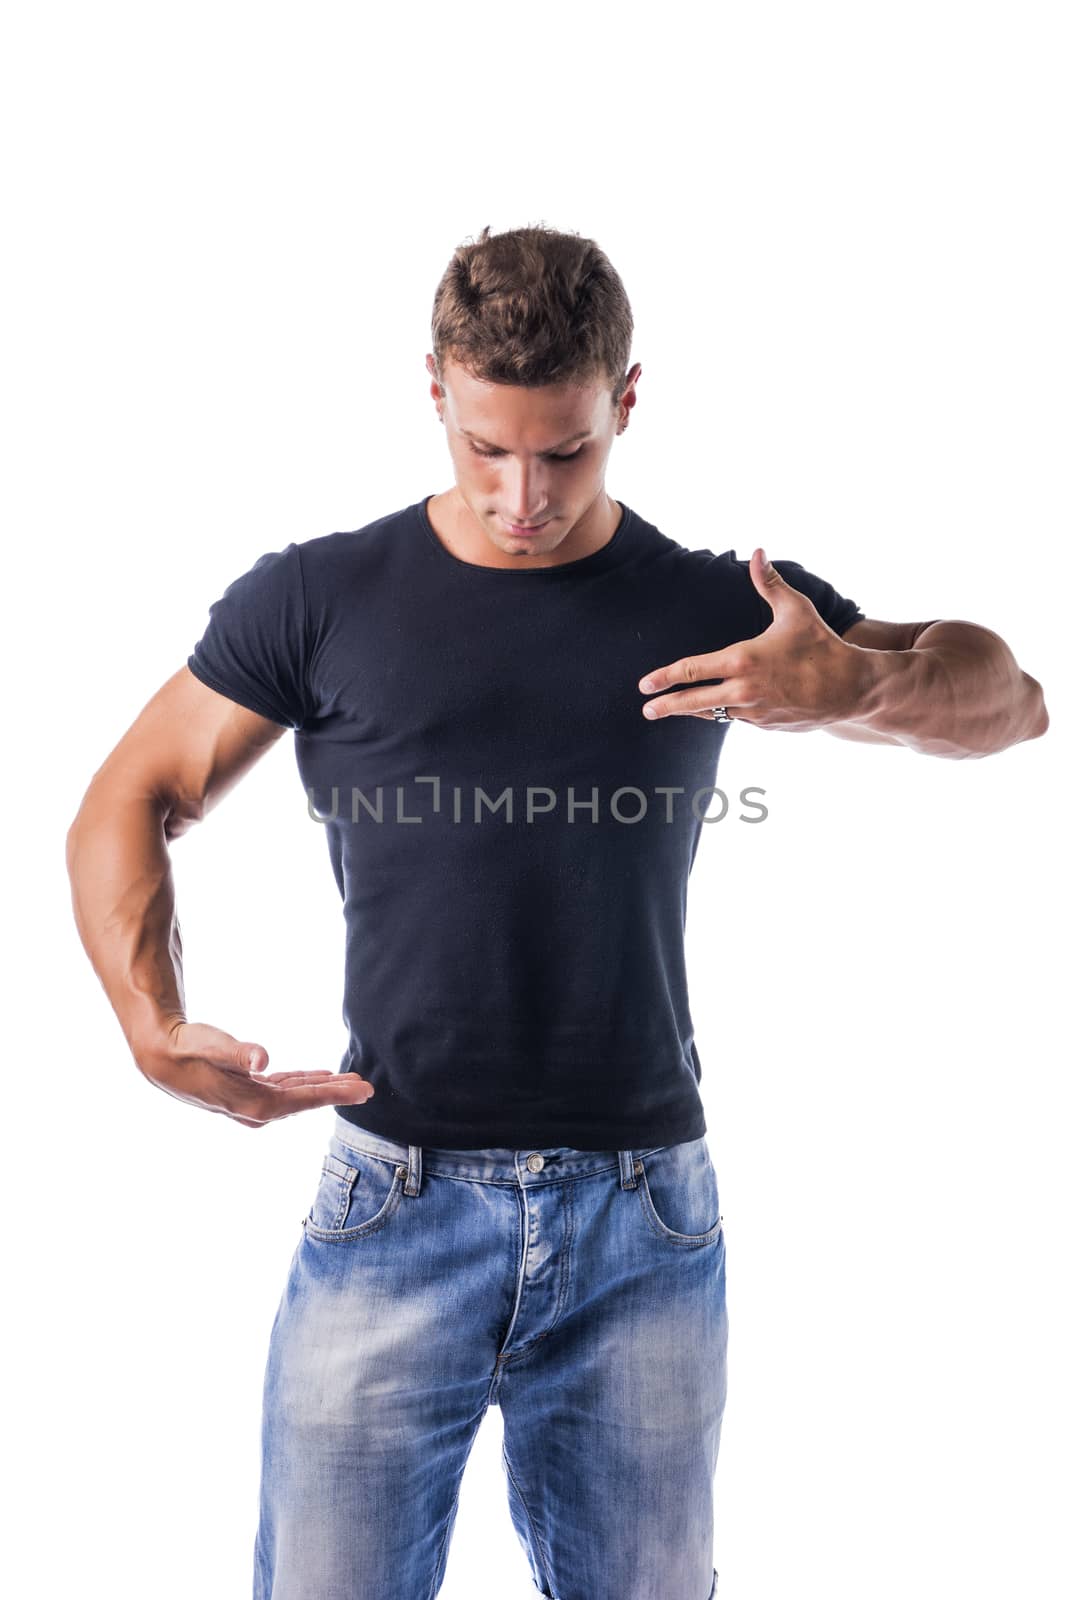 Handsome Muscular Young Man Wearing Casual Black Shirt and Jeans Showing Empty Copy Space on His T-Shirt with Hands Pose While Looking at It at the Studio. Isolated on White Background.